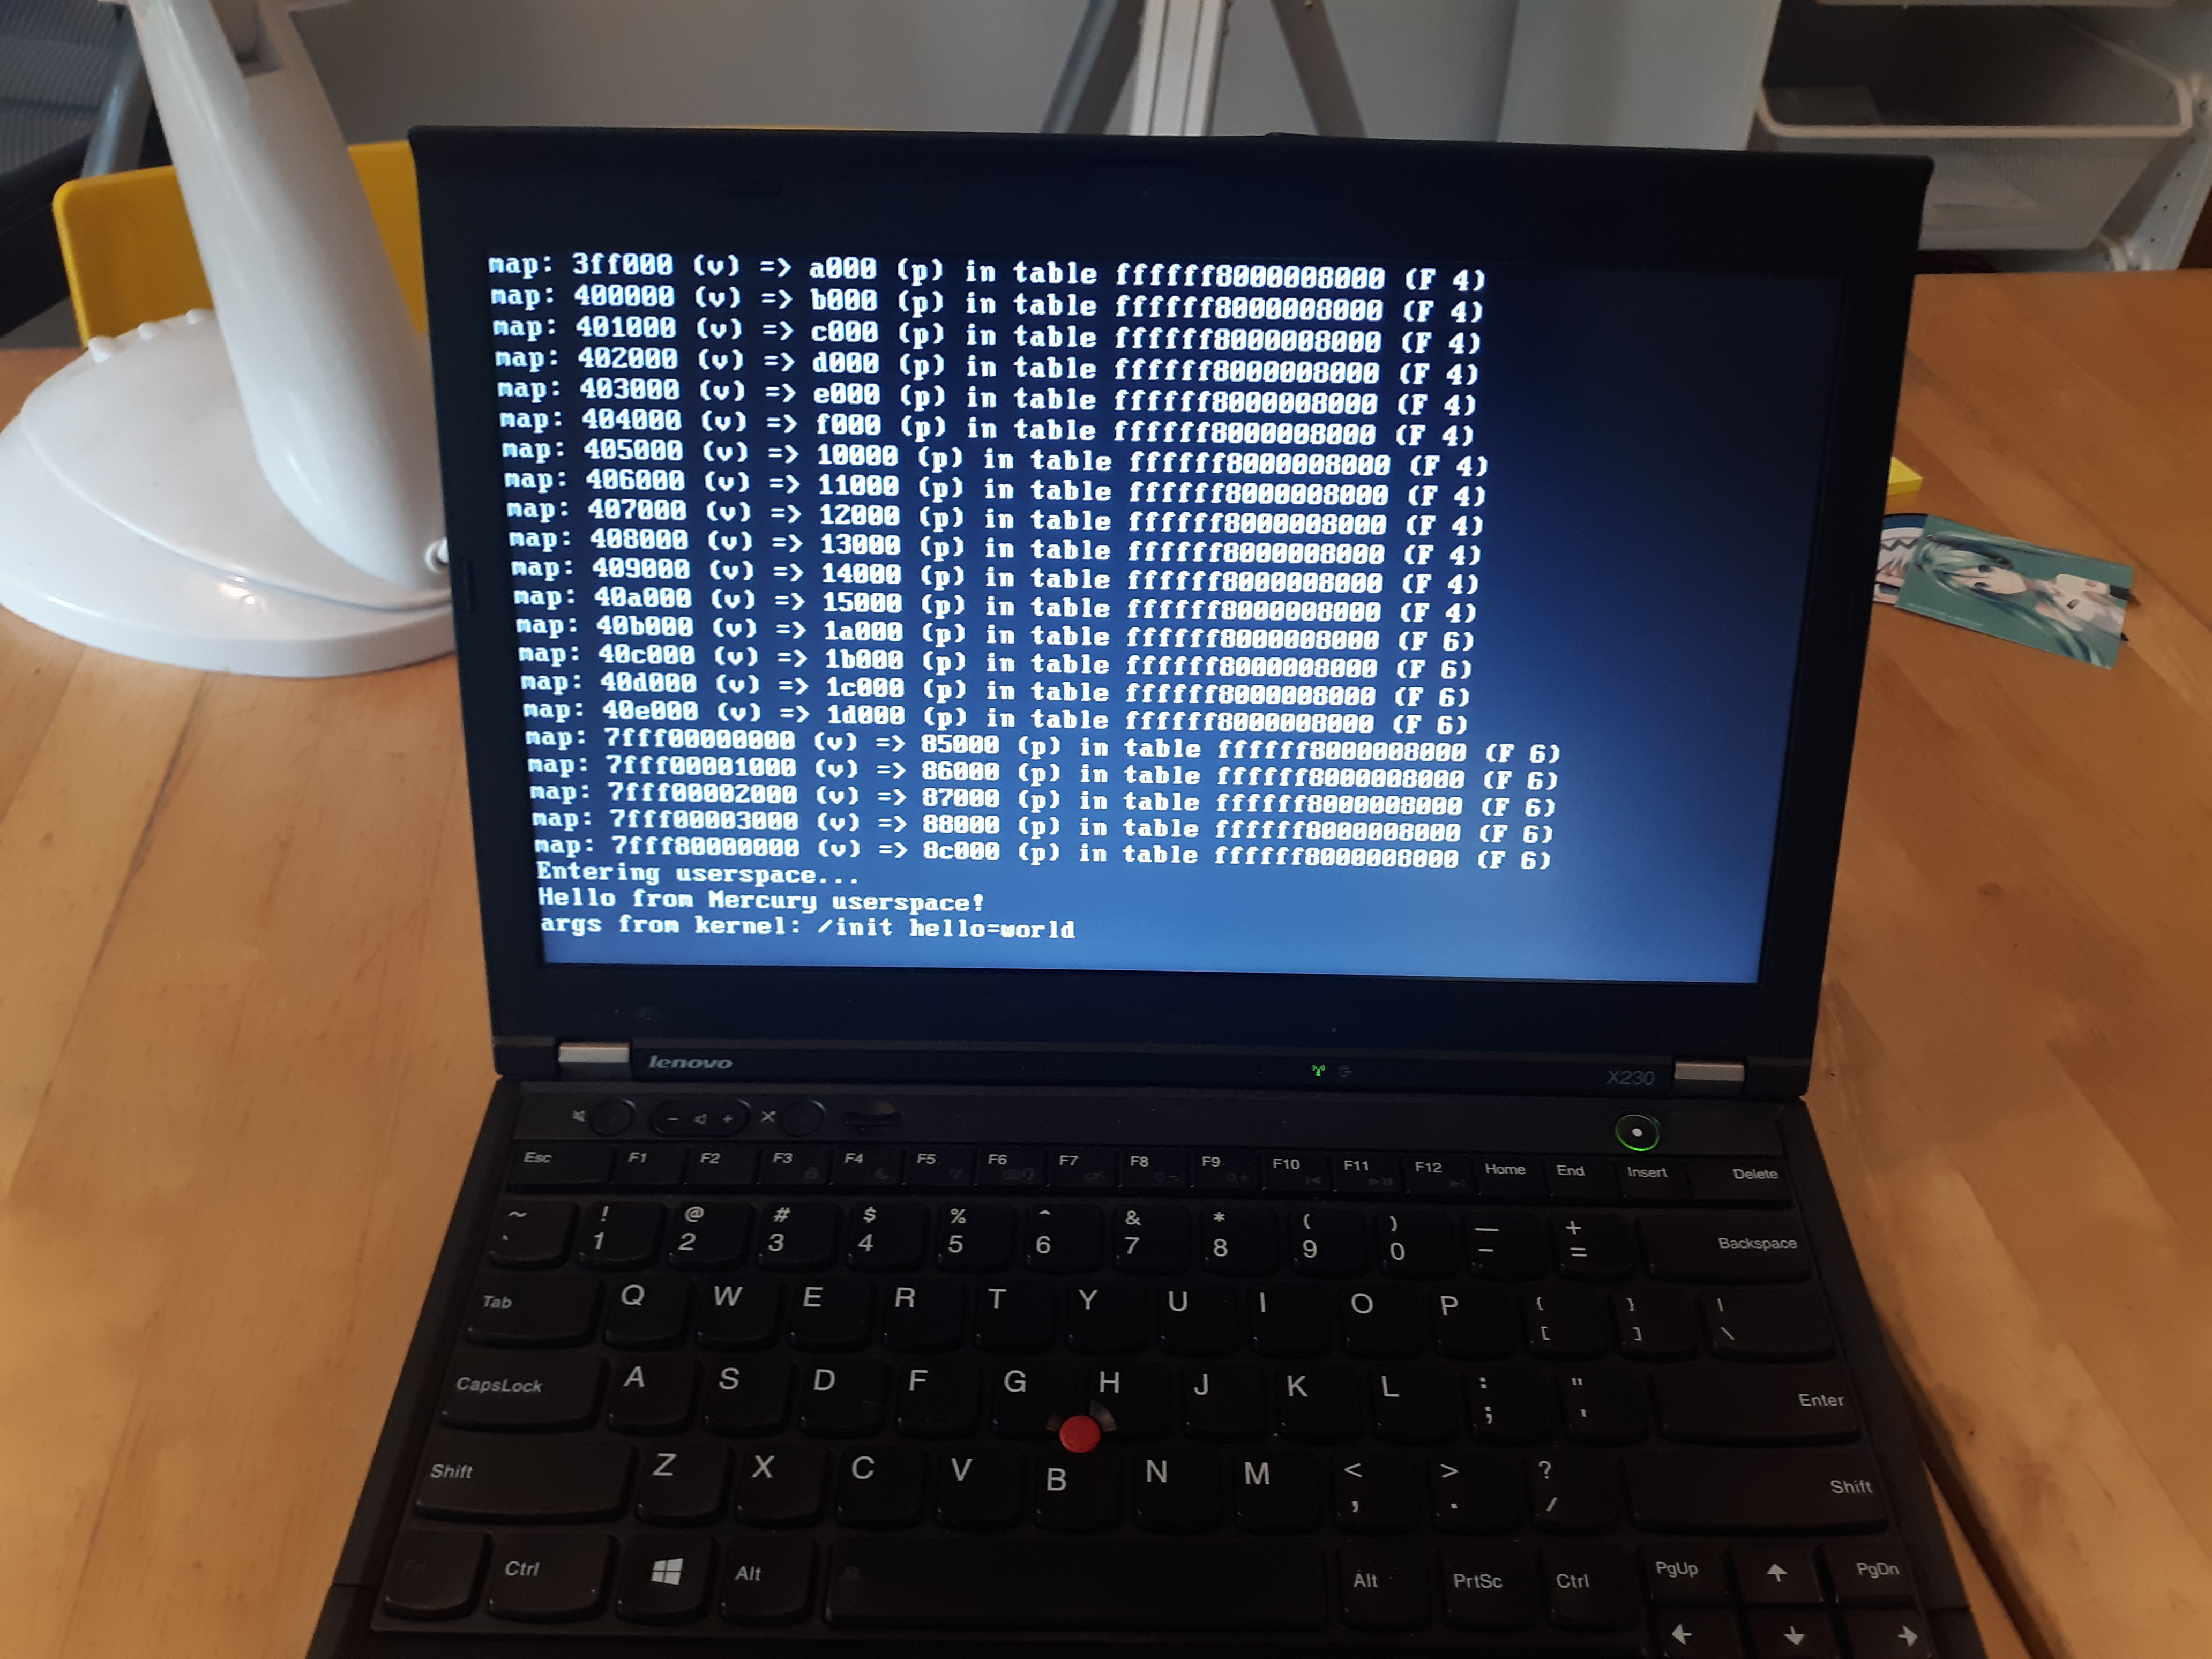 Picture of Helios booting on a ThinkPad